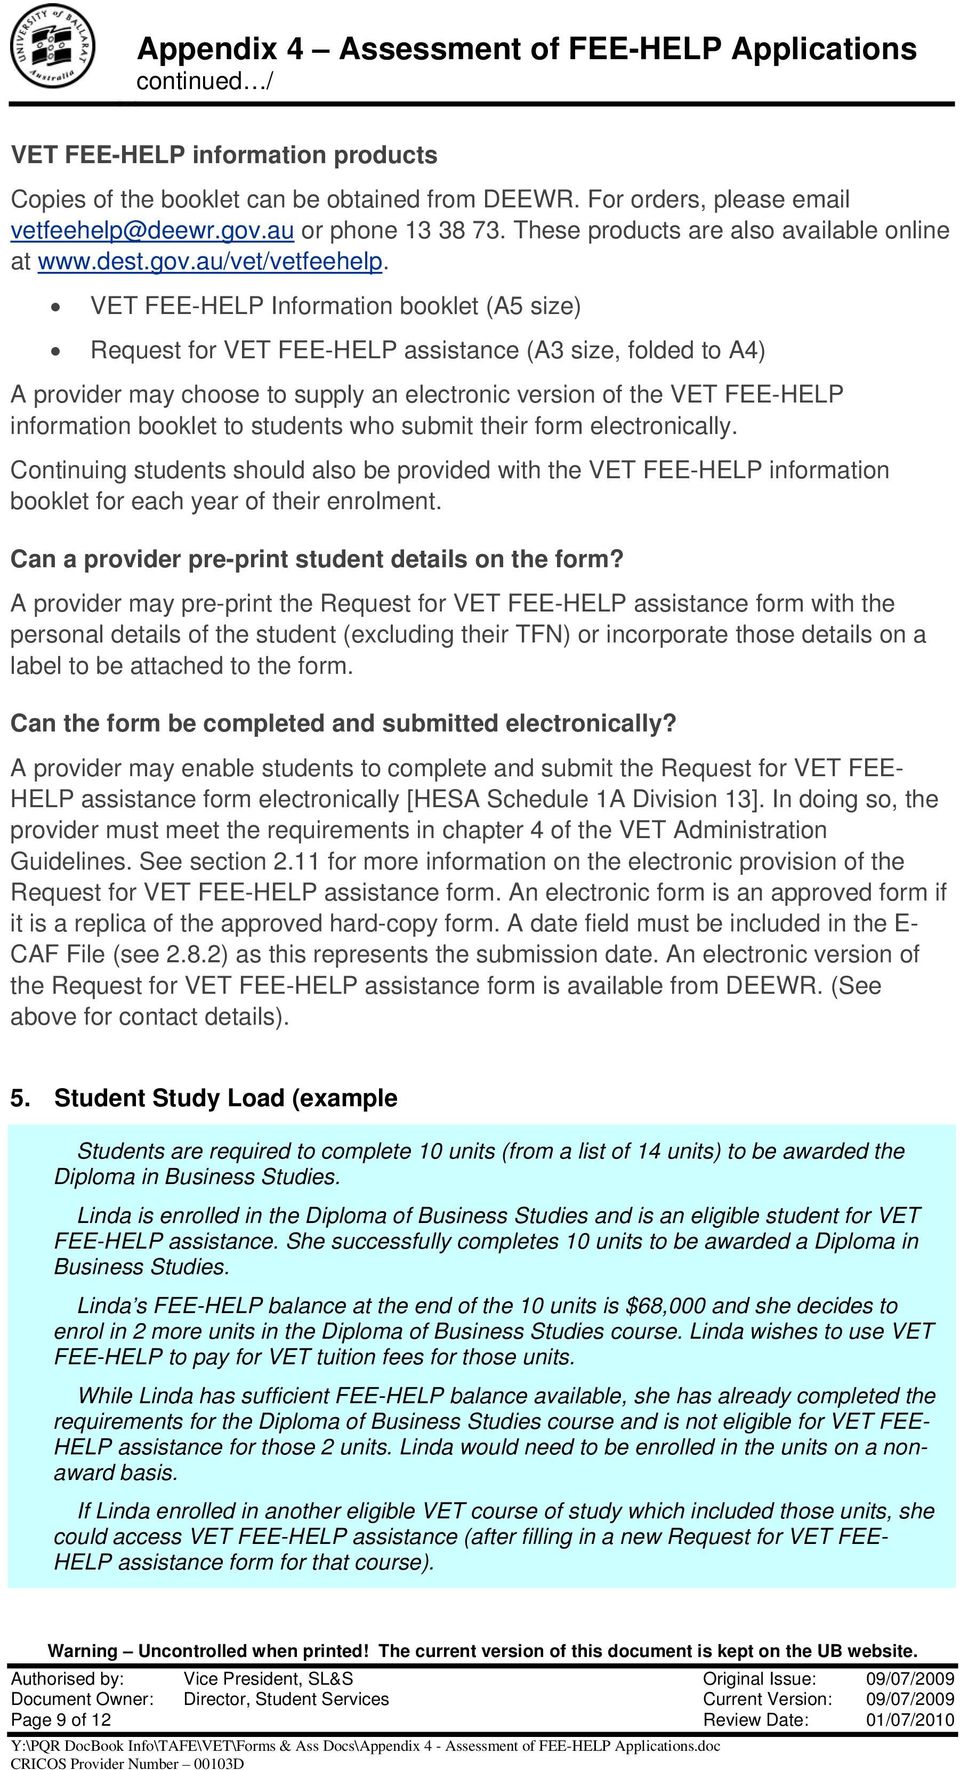 VET FEE-HELP Information booklet (A5 size) Request for VET FEE-HELP assistance (A3 size, folded to A4) A provider may choose to supply an electronic version of the VET FEE-HELP information booklet to